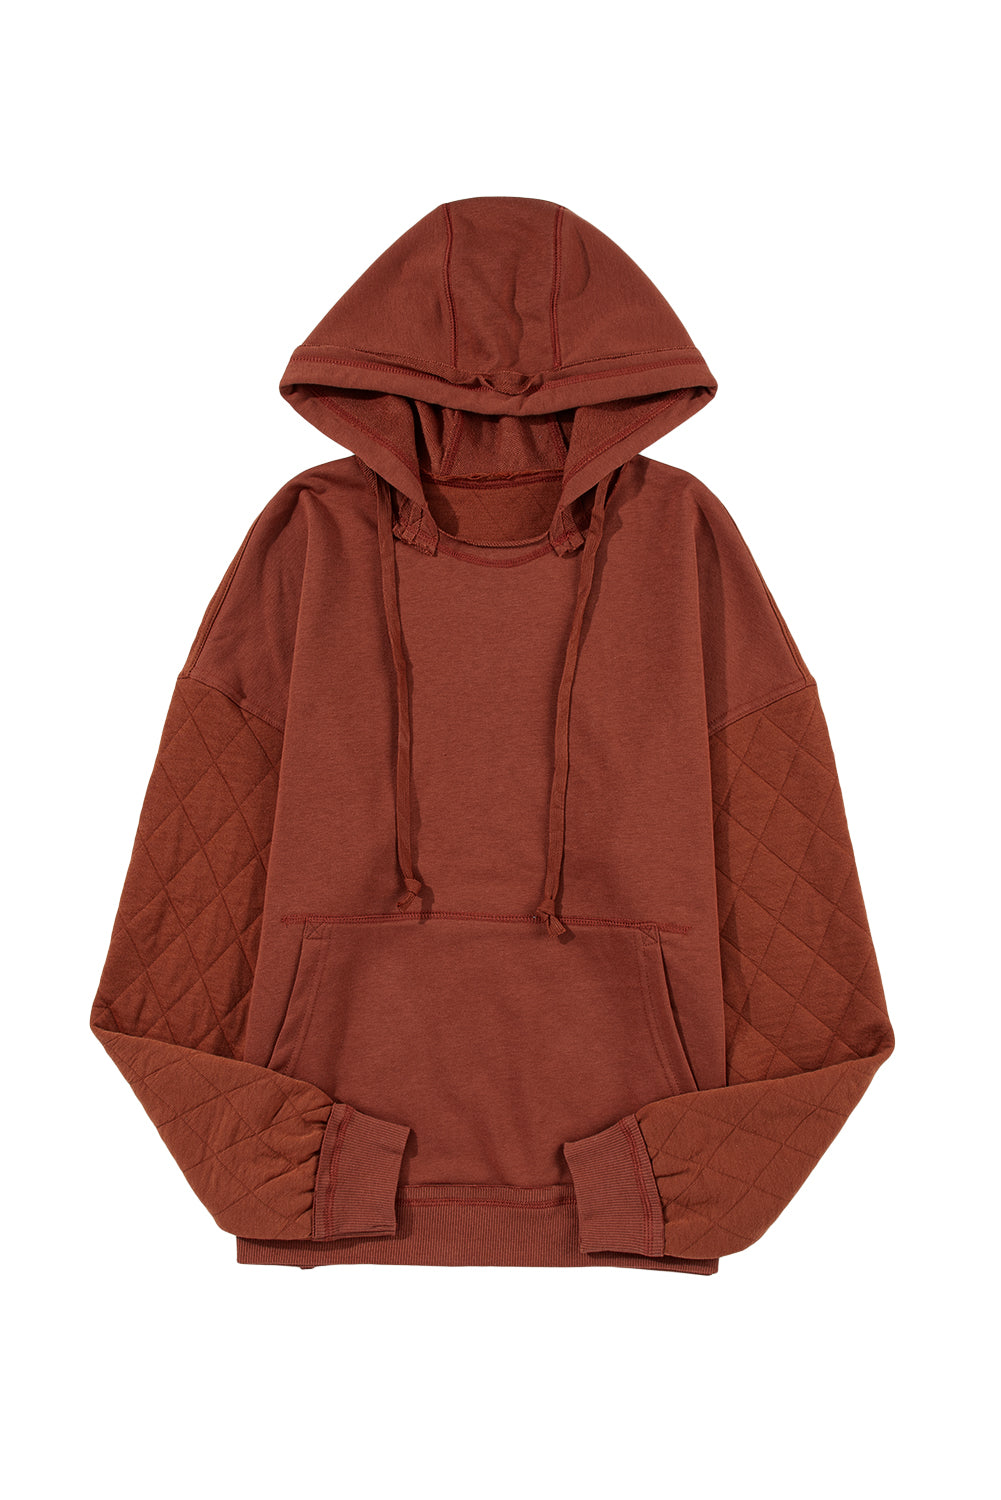 Chestnut Quilted Patchwork Exposed Seam Hoodie - SELFTRITSS